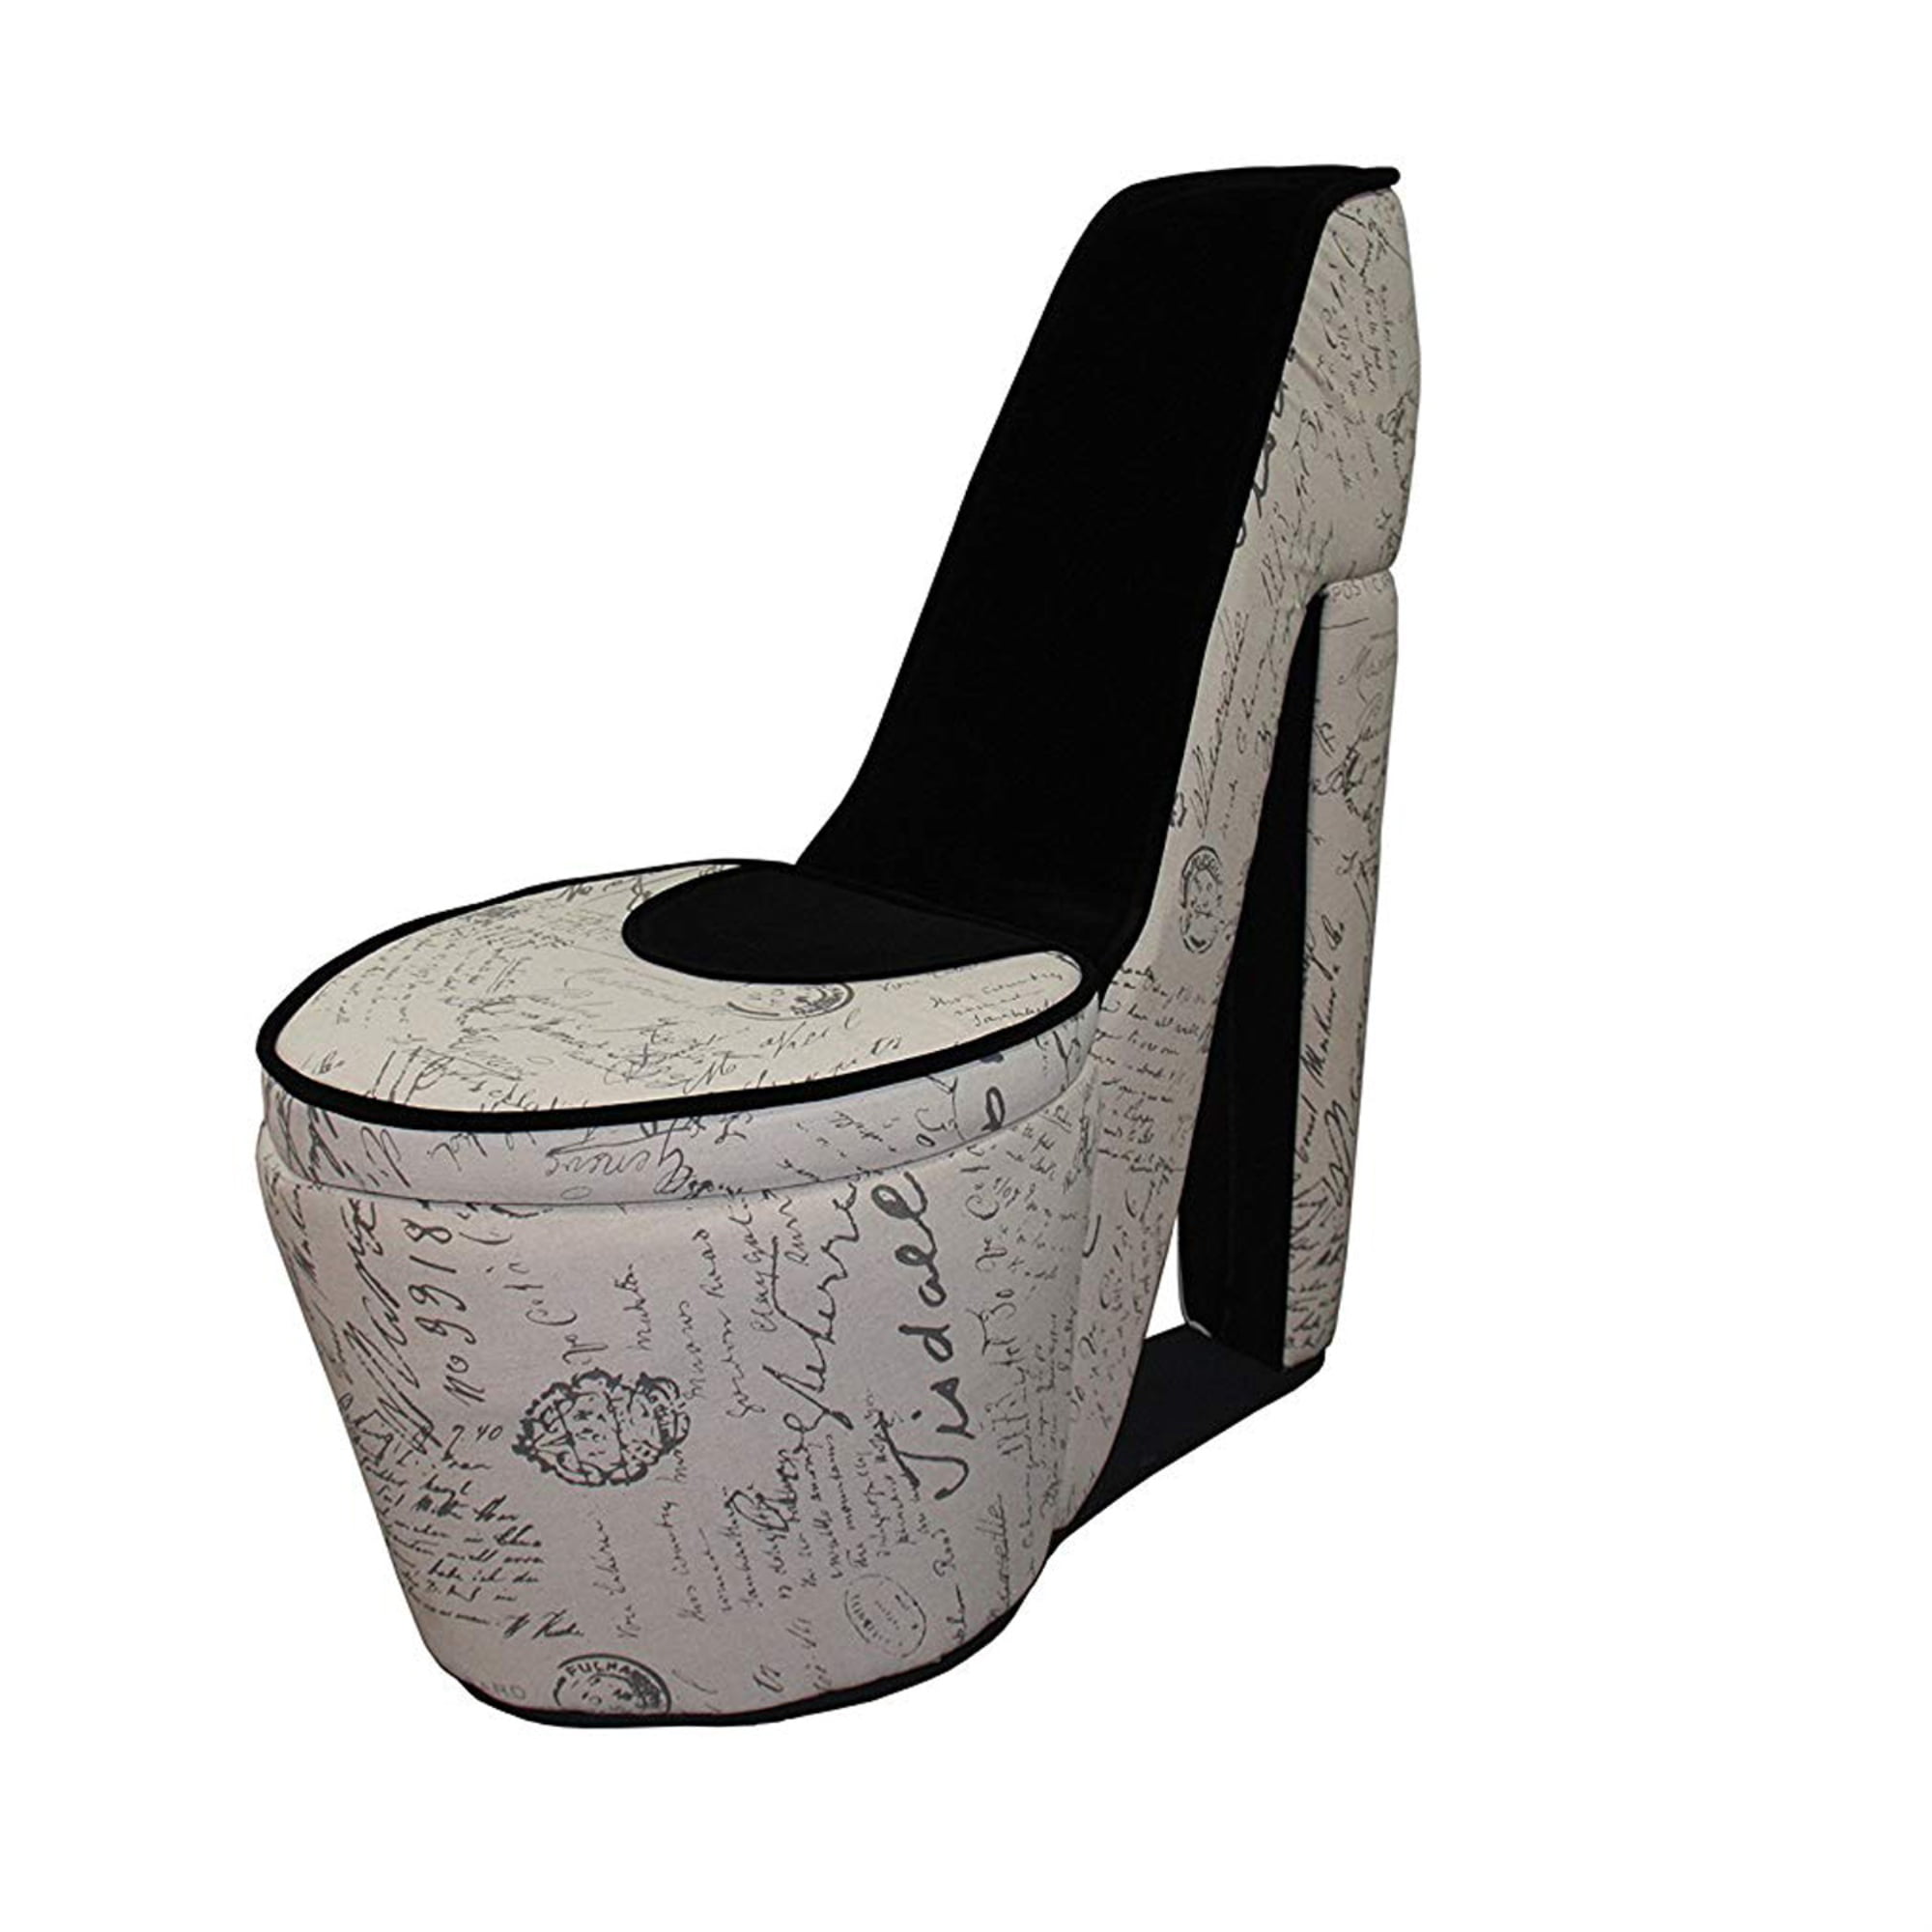 Script Print High Heel Shaped Chair With Storage